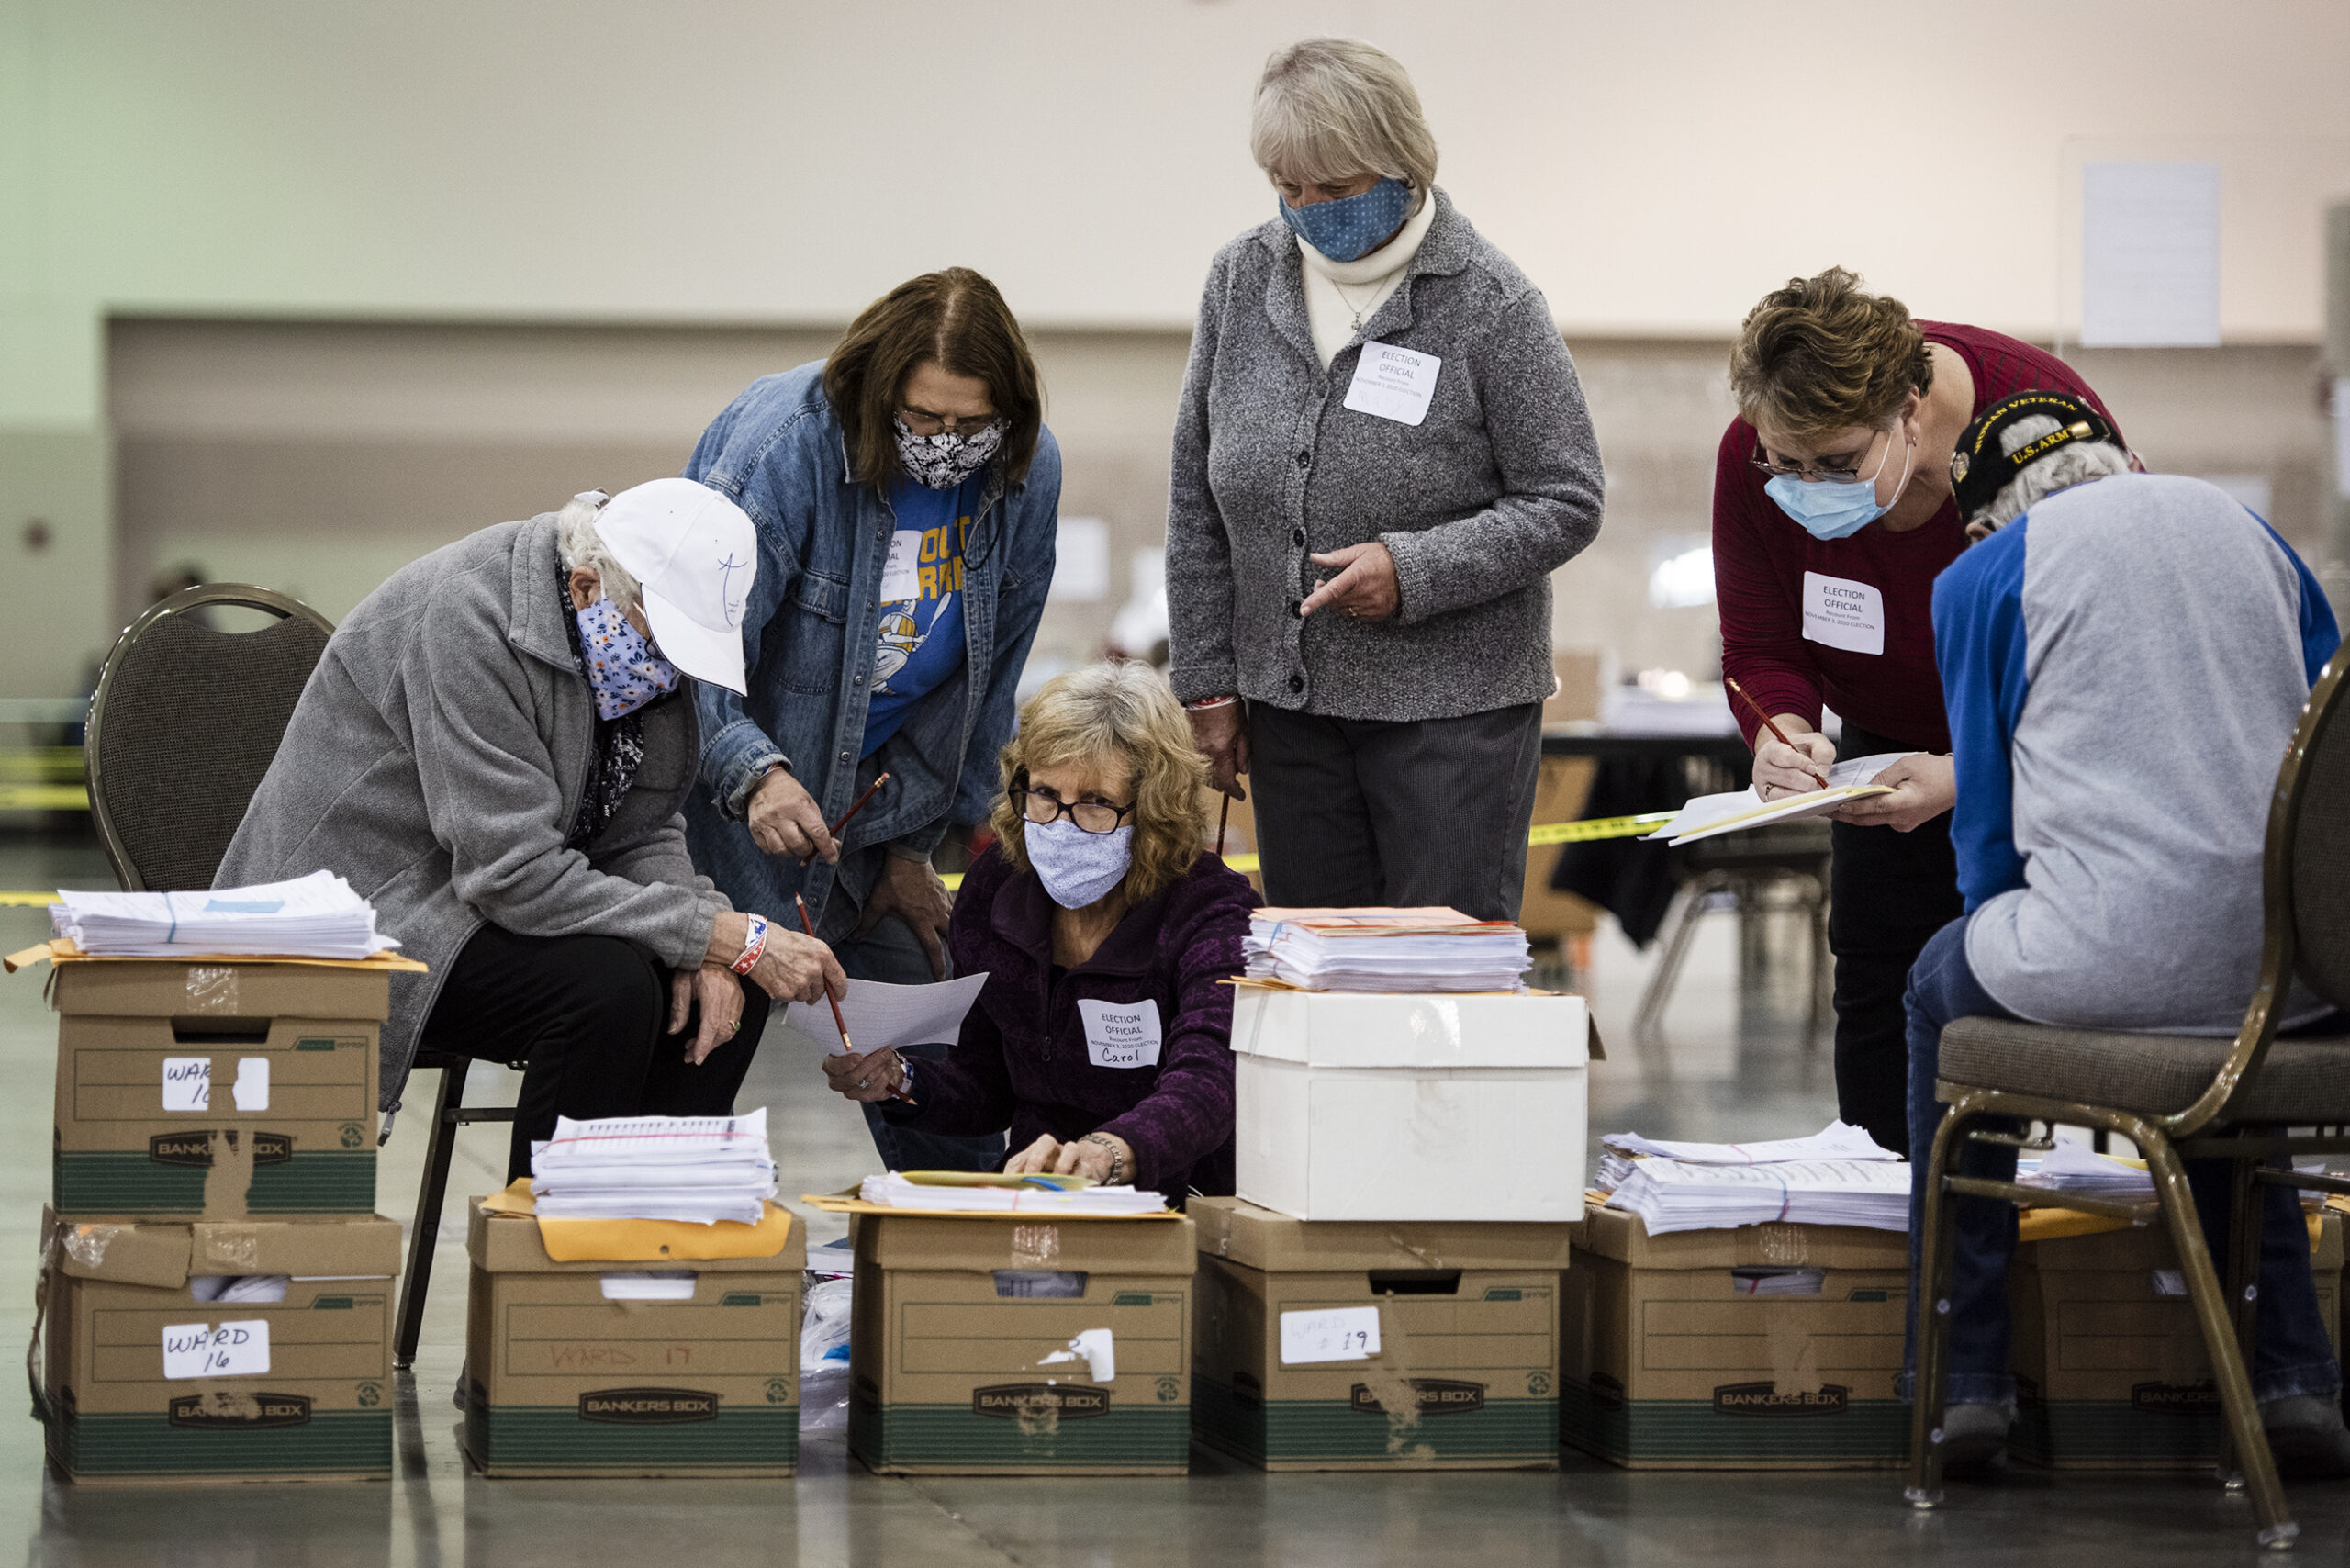 Wisconsin Presidential Recount Continues After Weekend Of Conflict Between Officials, Observers